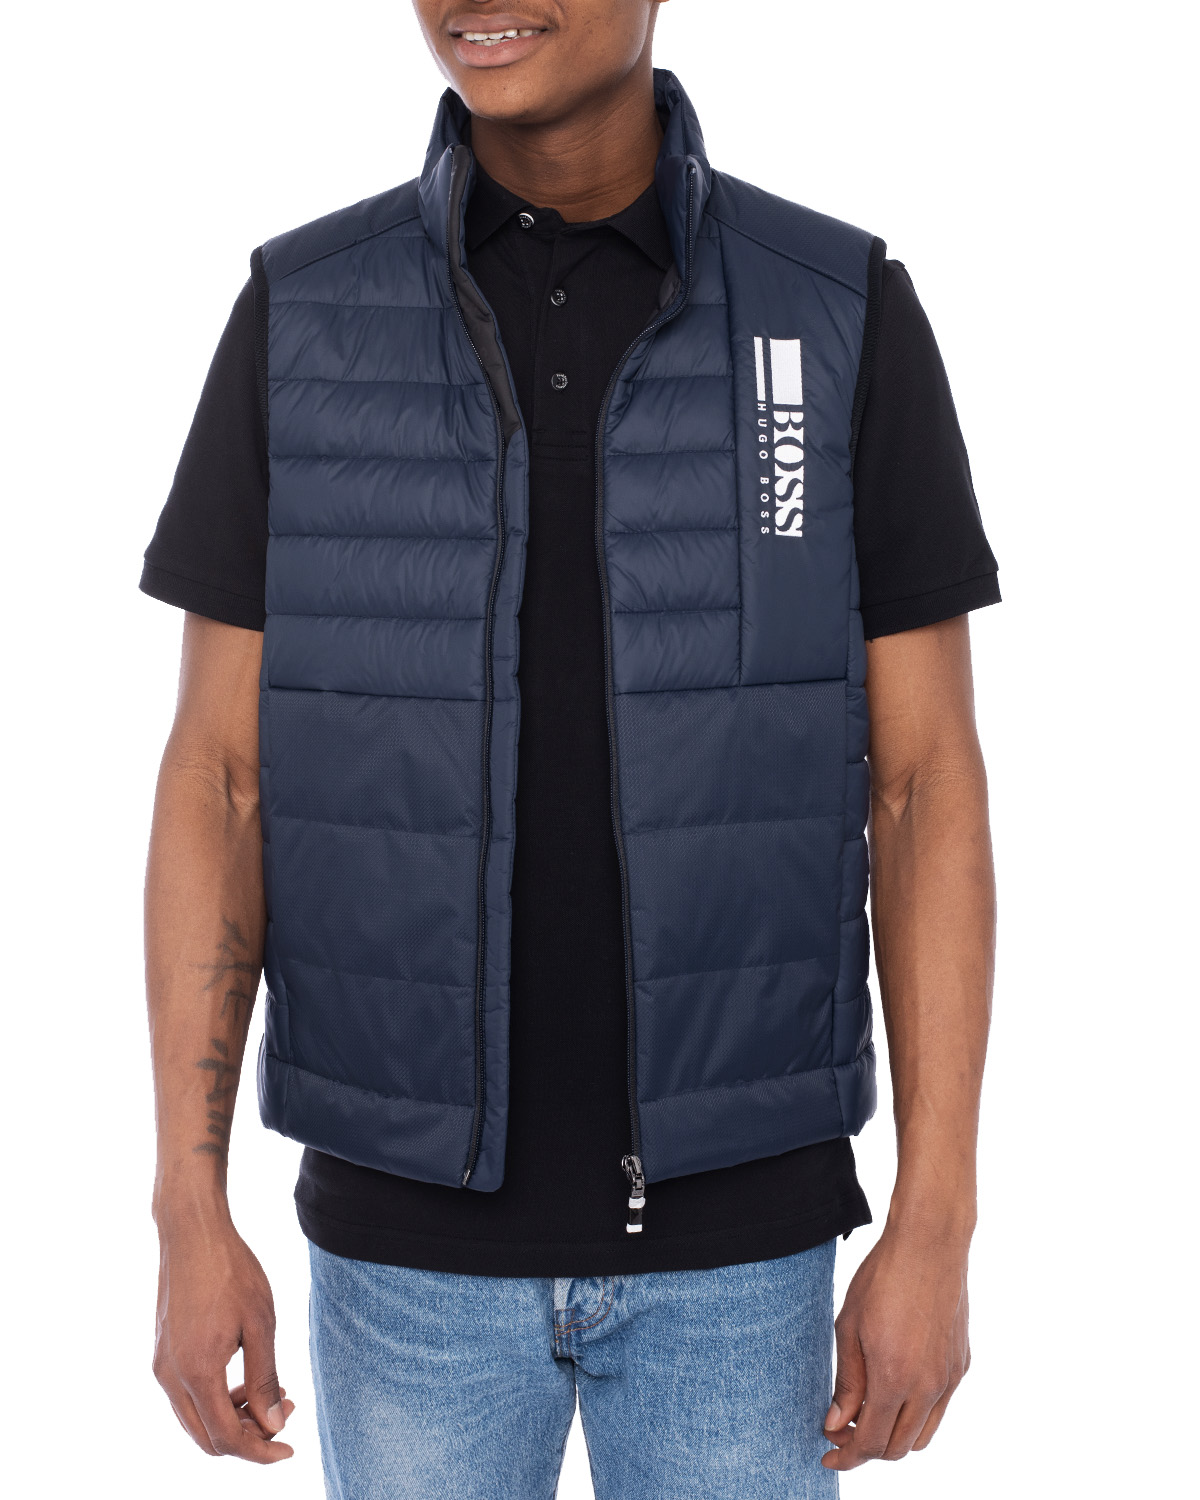 Hugo Boss BOSS Mens Lightweight Down Vest Navy 56  Amazonca Clothing  Shoes  Accessories